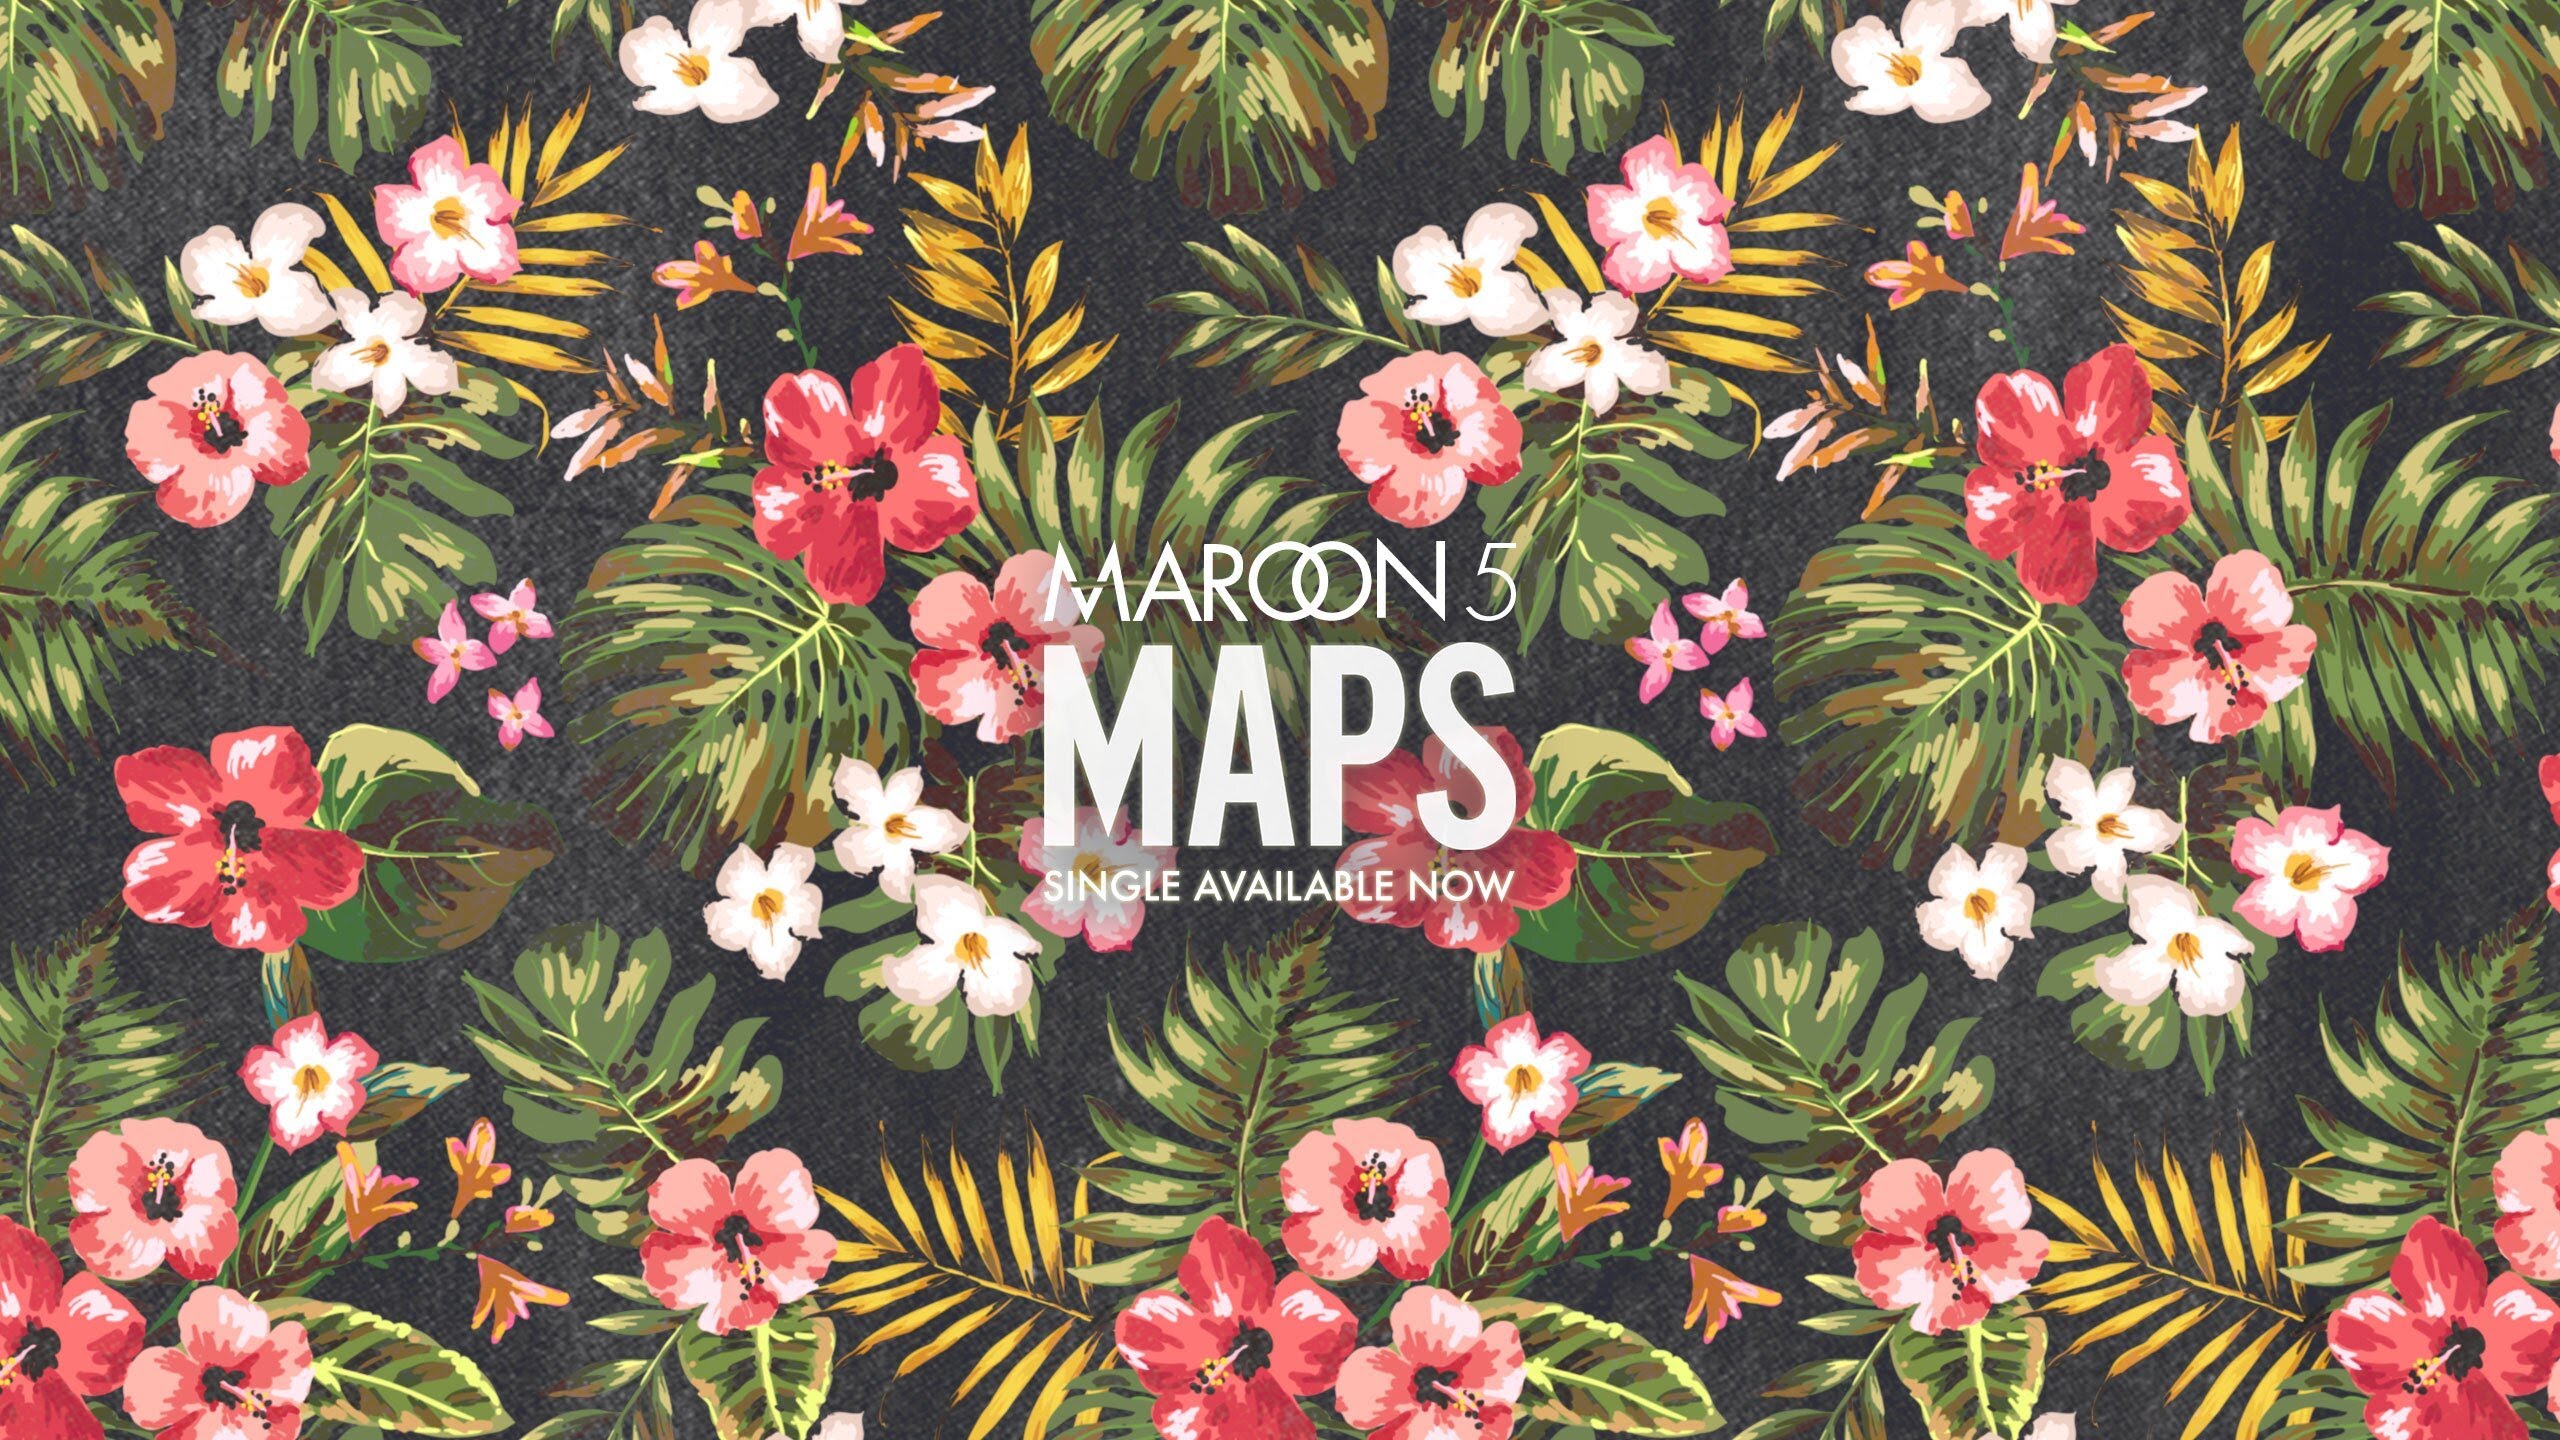 Maroon Maps New Single Available Wallpaper With